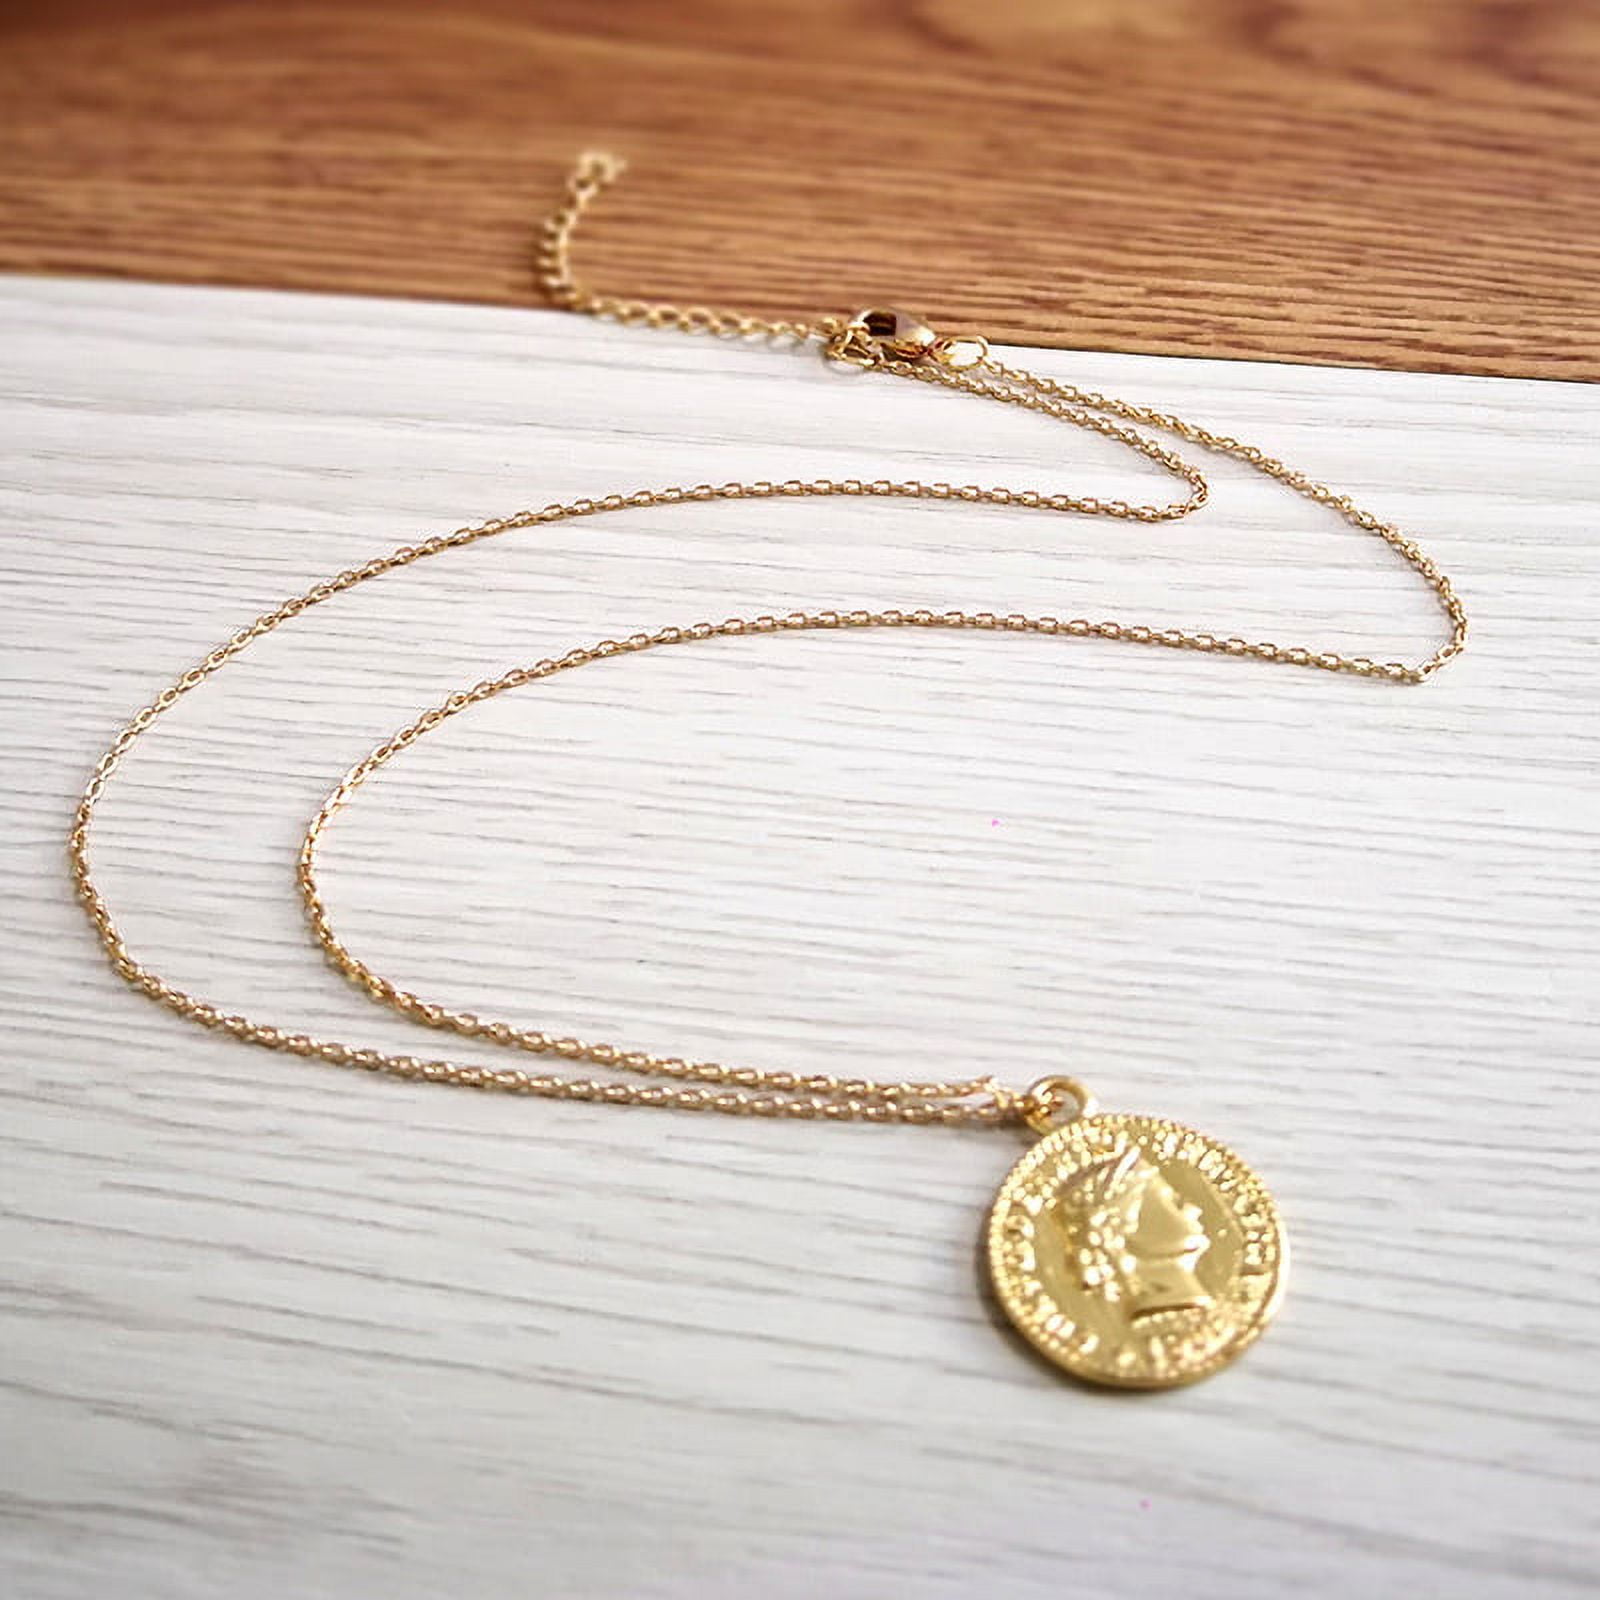 Men's Liberty Coin 24 Pendant Necklace in 18K Gold-Plated Sterling Silver - Gold Over Silver